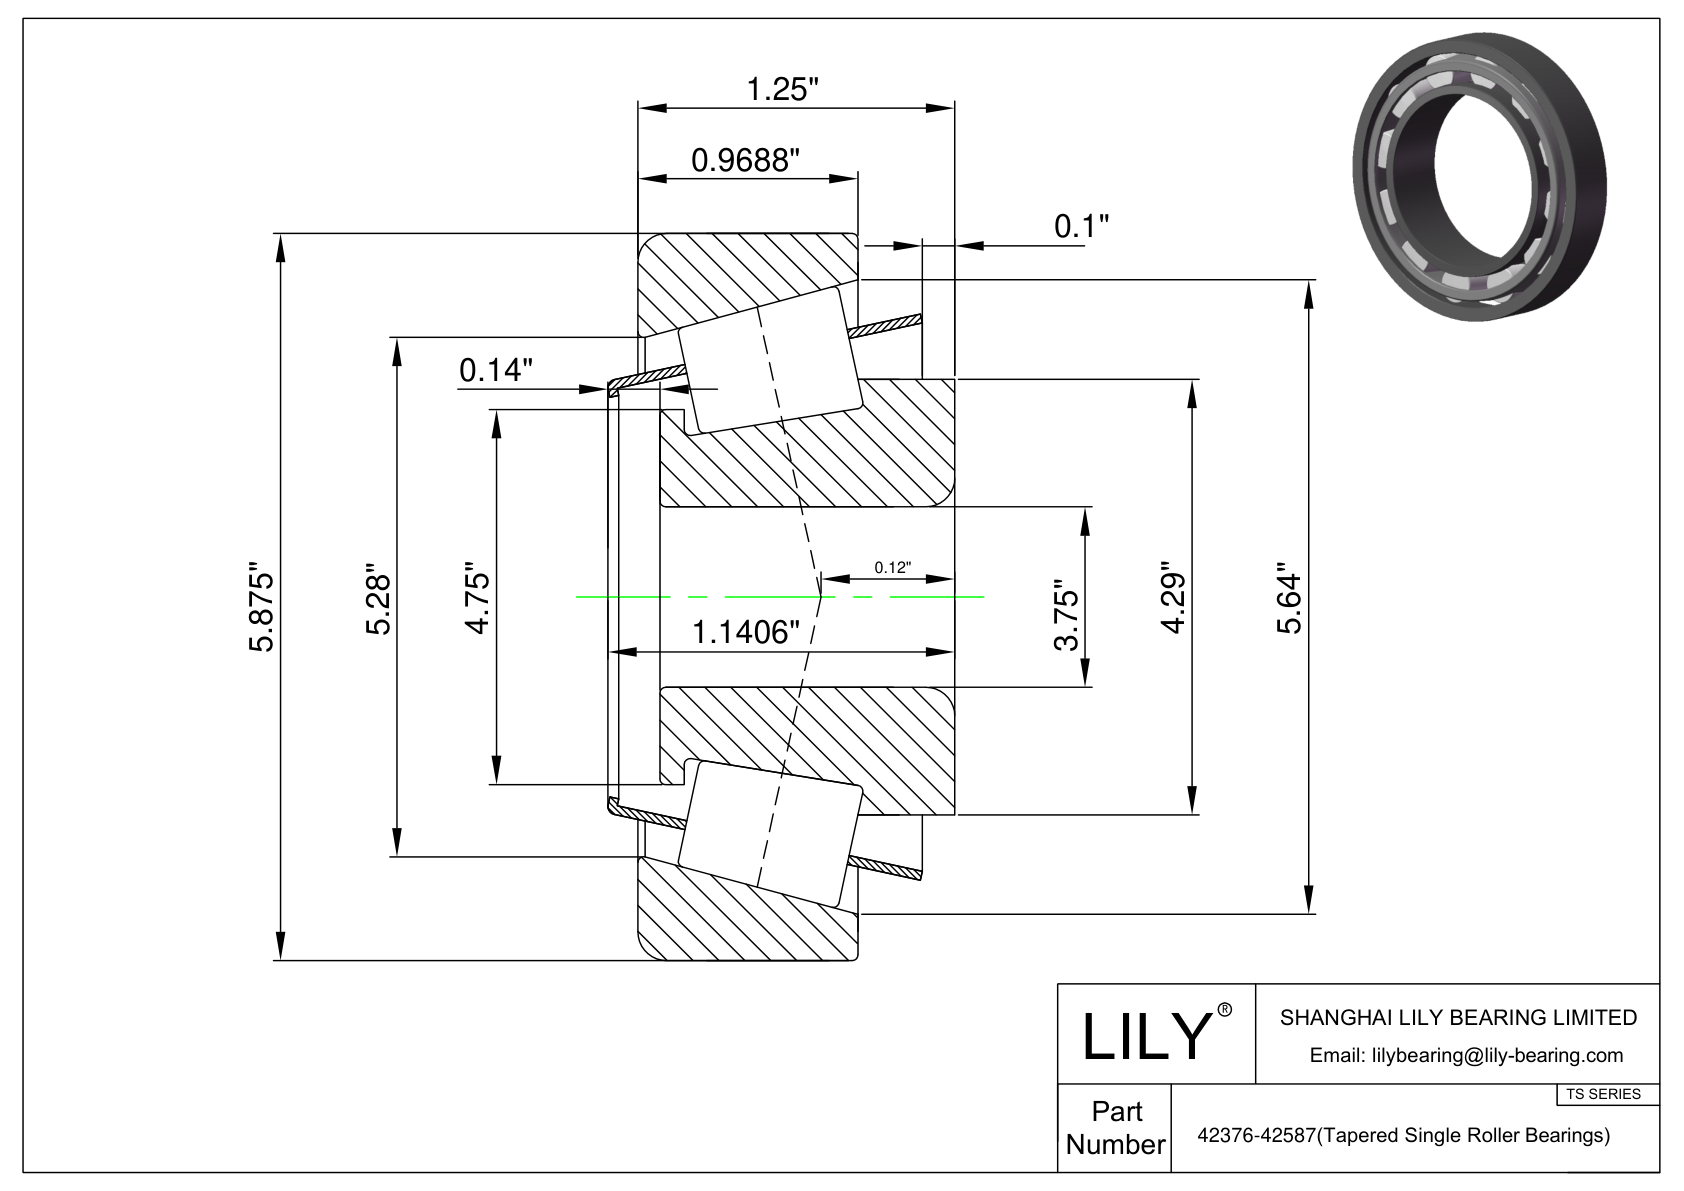 42376-42587 TS (Tapered Single Roller Bearings) (Imperial) cad drawing